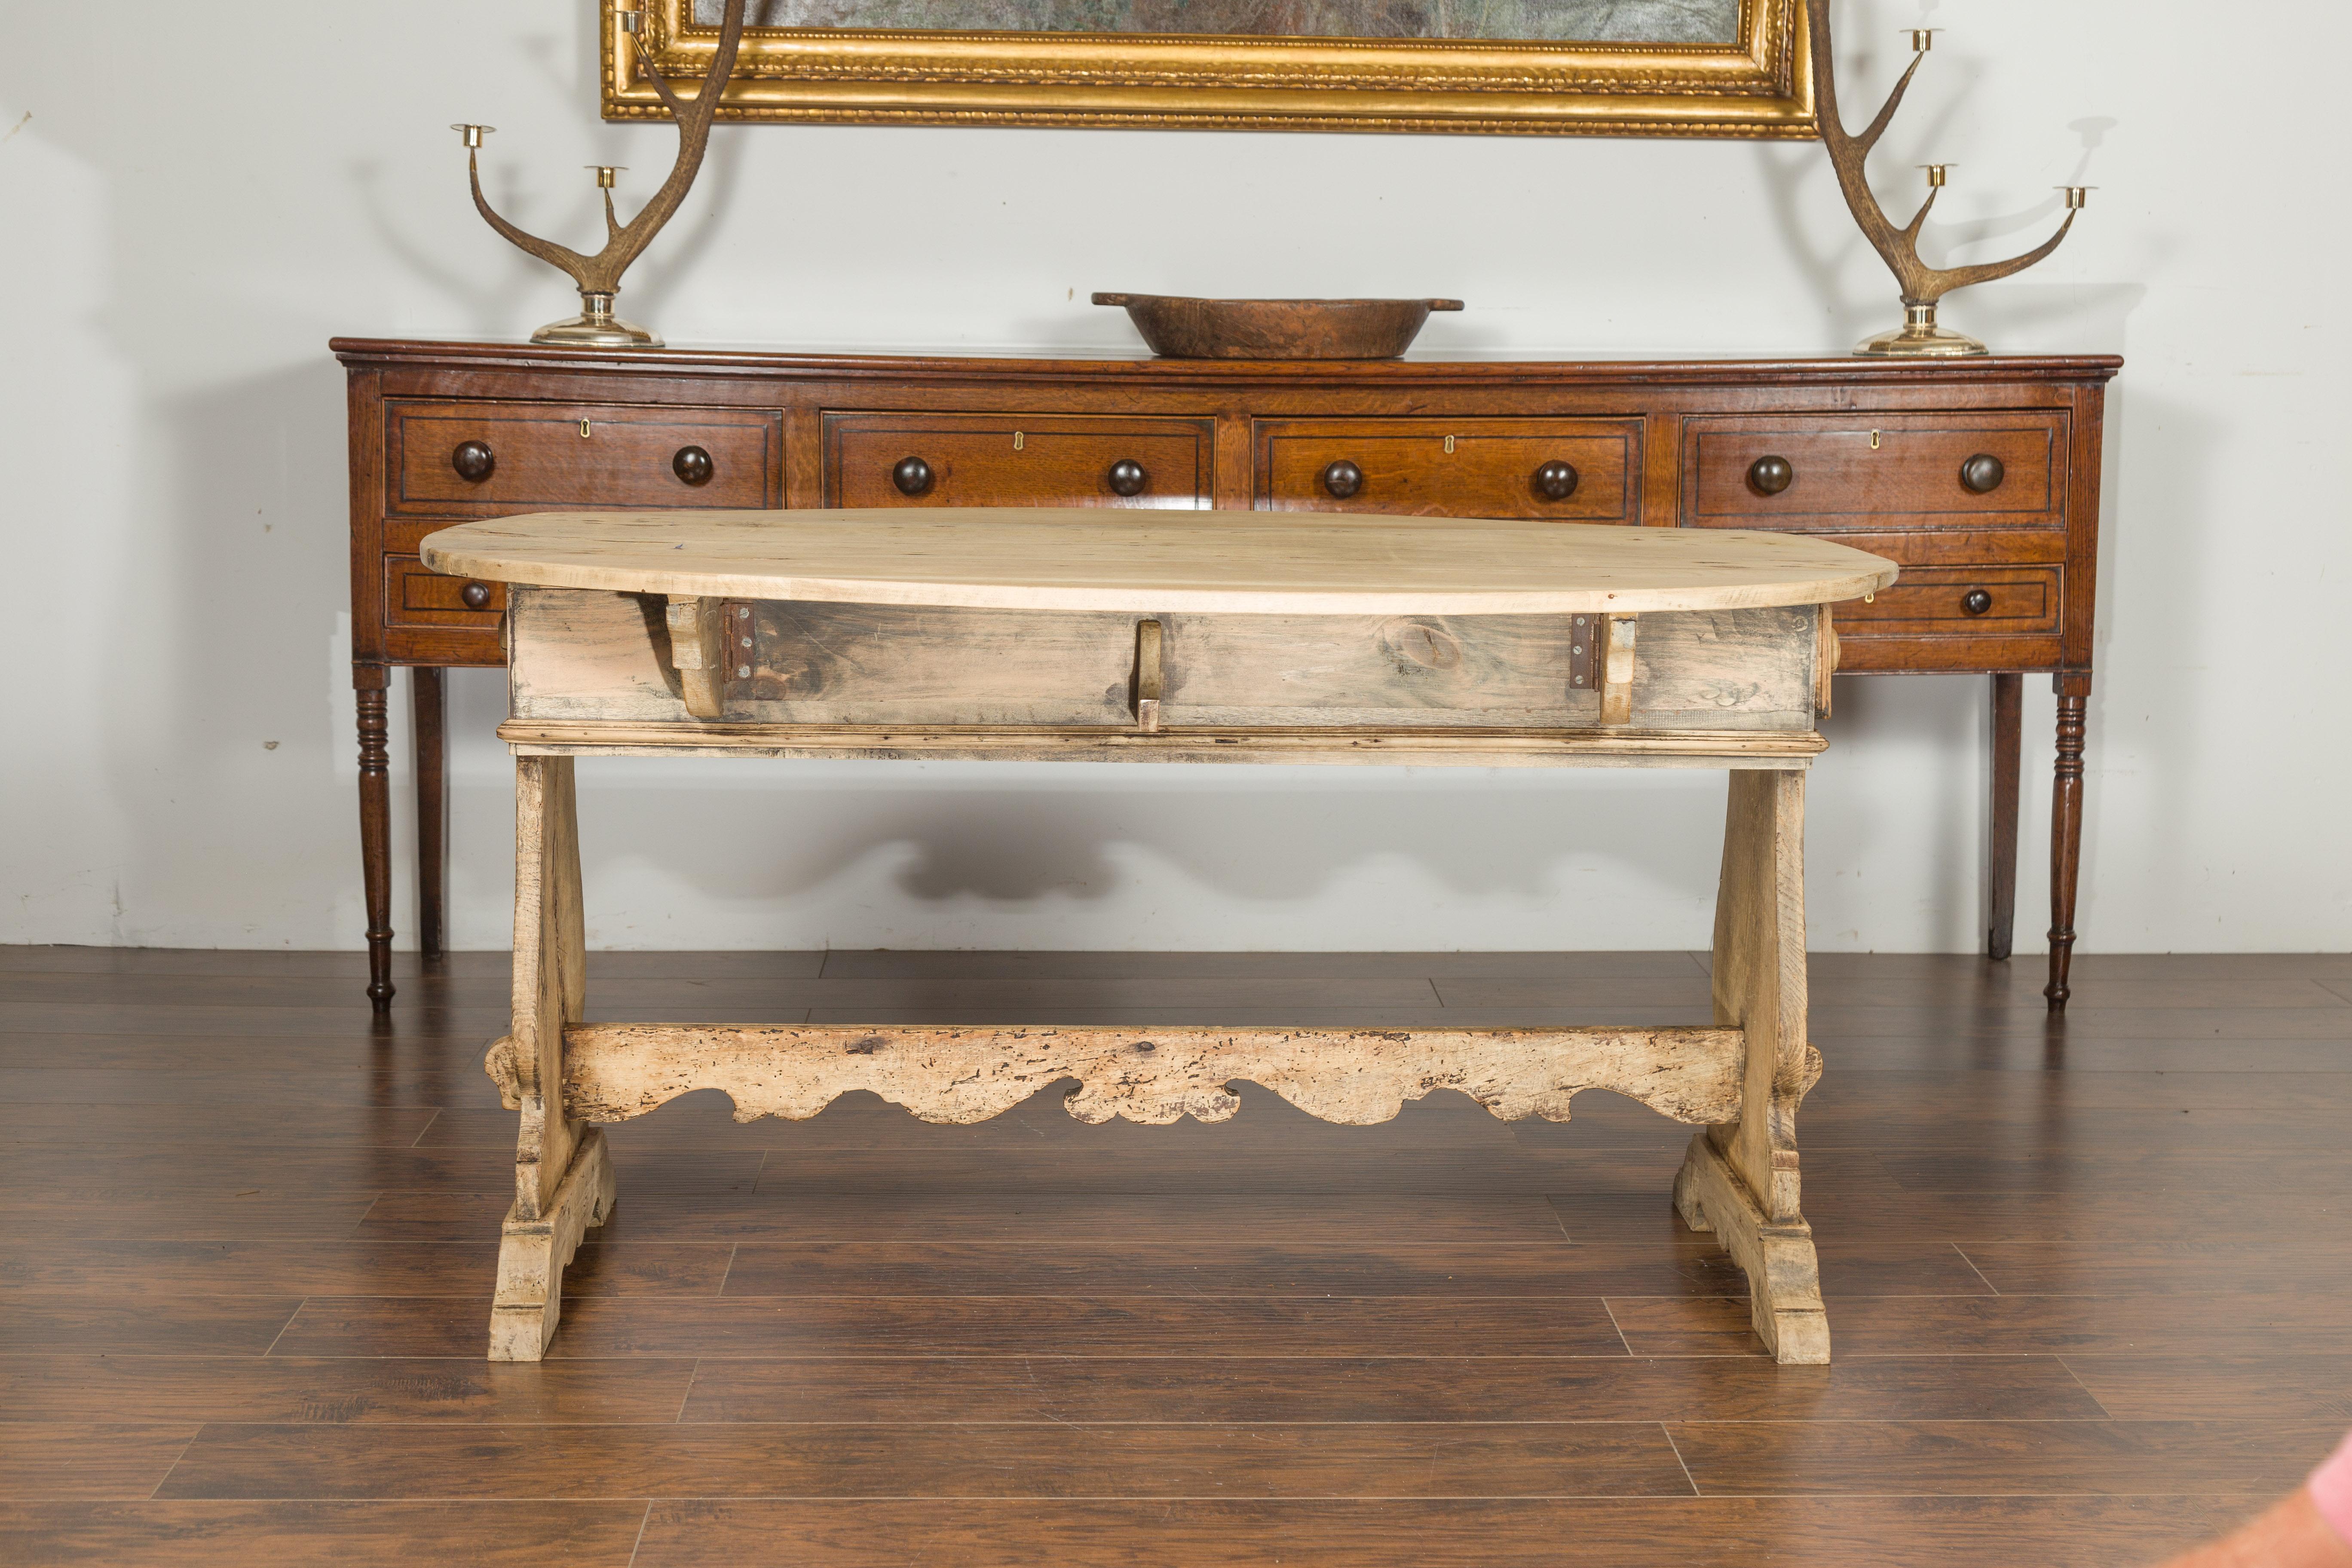 Oval Italian 1800s Bleached Walnut Drop-Leaf Trestle Table with Drawers In Good Condition For Sale In Atlanta, GA